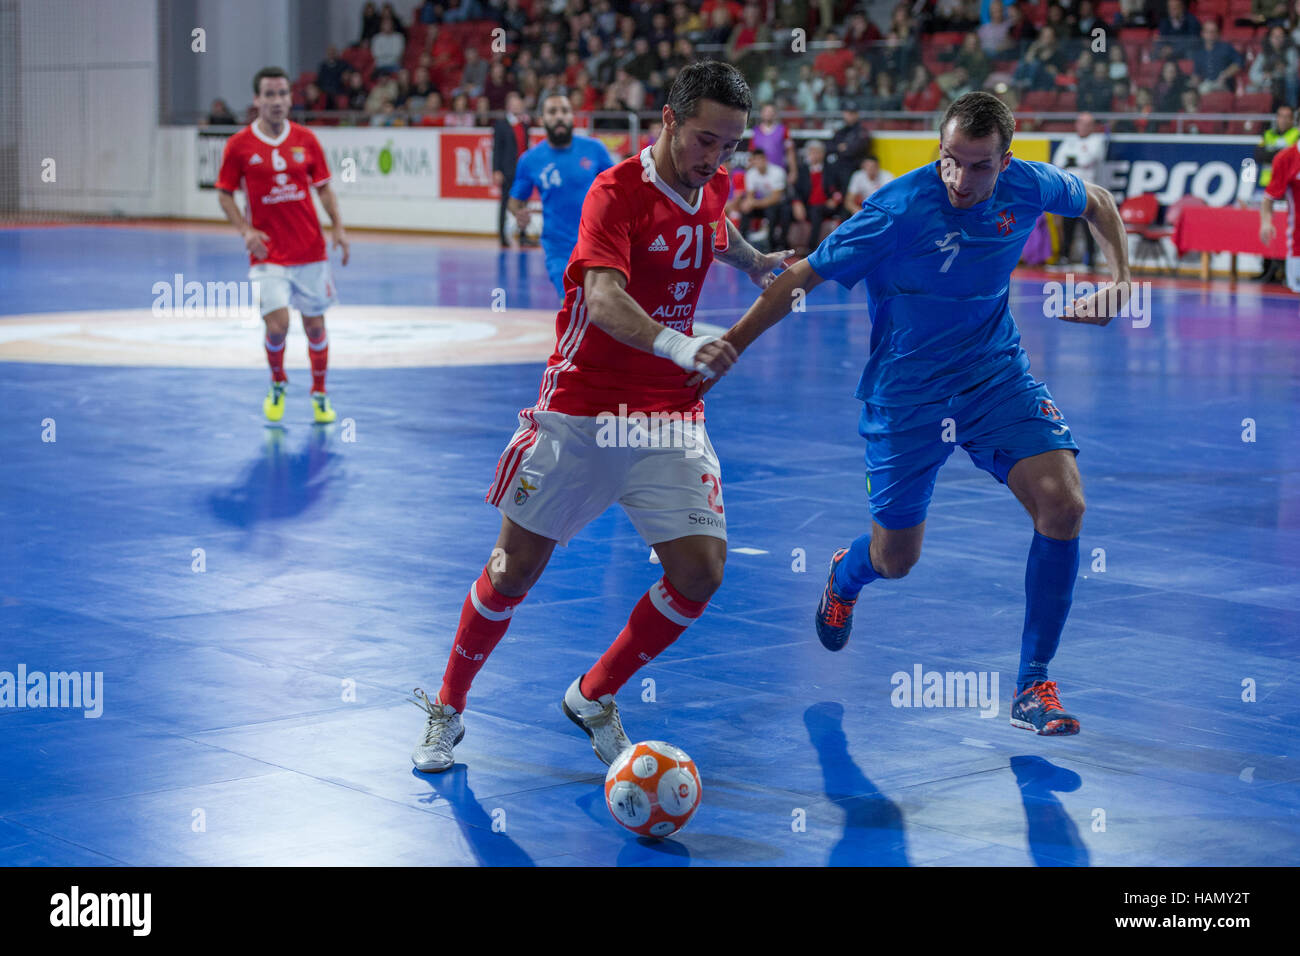 Lisbon, Portugal. 1st December, 2016. Benfica's winger from Portugal Miguel Castro (21) and Belenenses's winger from Portugal Tiago Pinto (7) in action during the game SL Benfica v CF Os Belenenses Credit:  Alexandre de Sousa/Alamy Live News Stock Photo